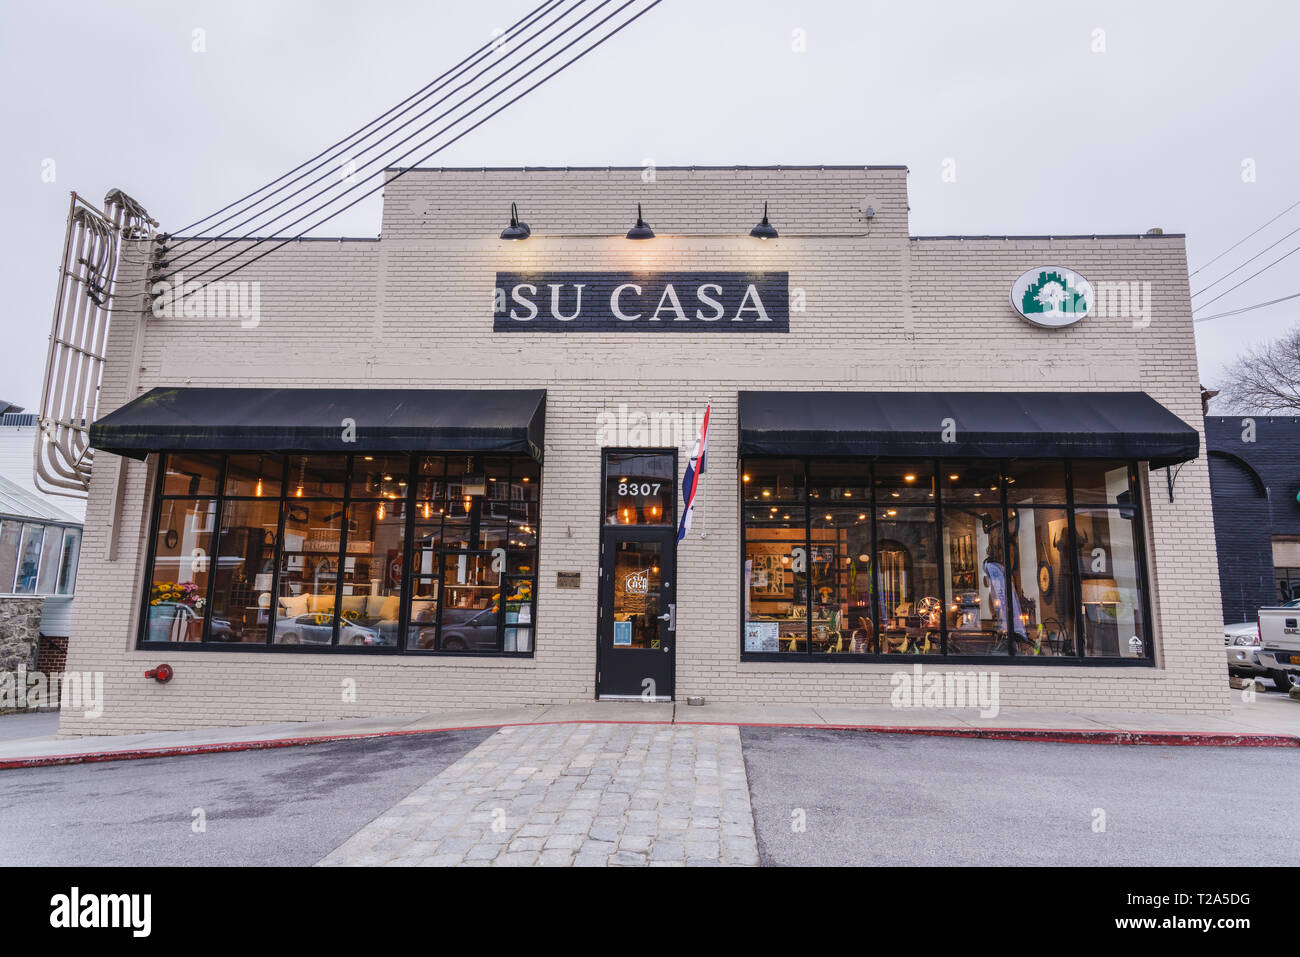 Ellicott City, MD - March 9, 2019: Su Casa is a furniture and home  accessories store on main street. Stock Photo